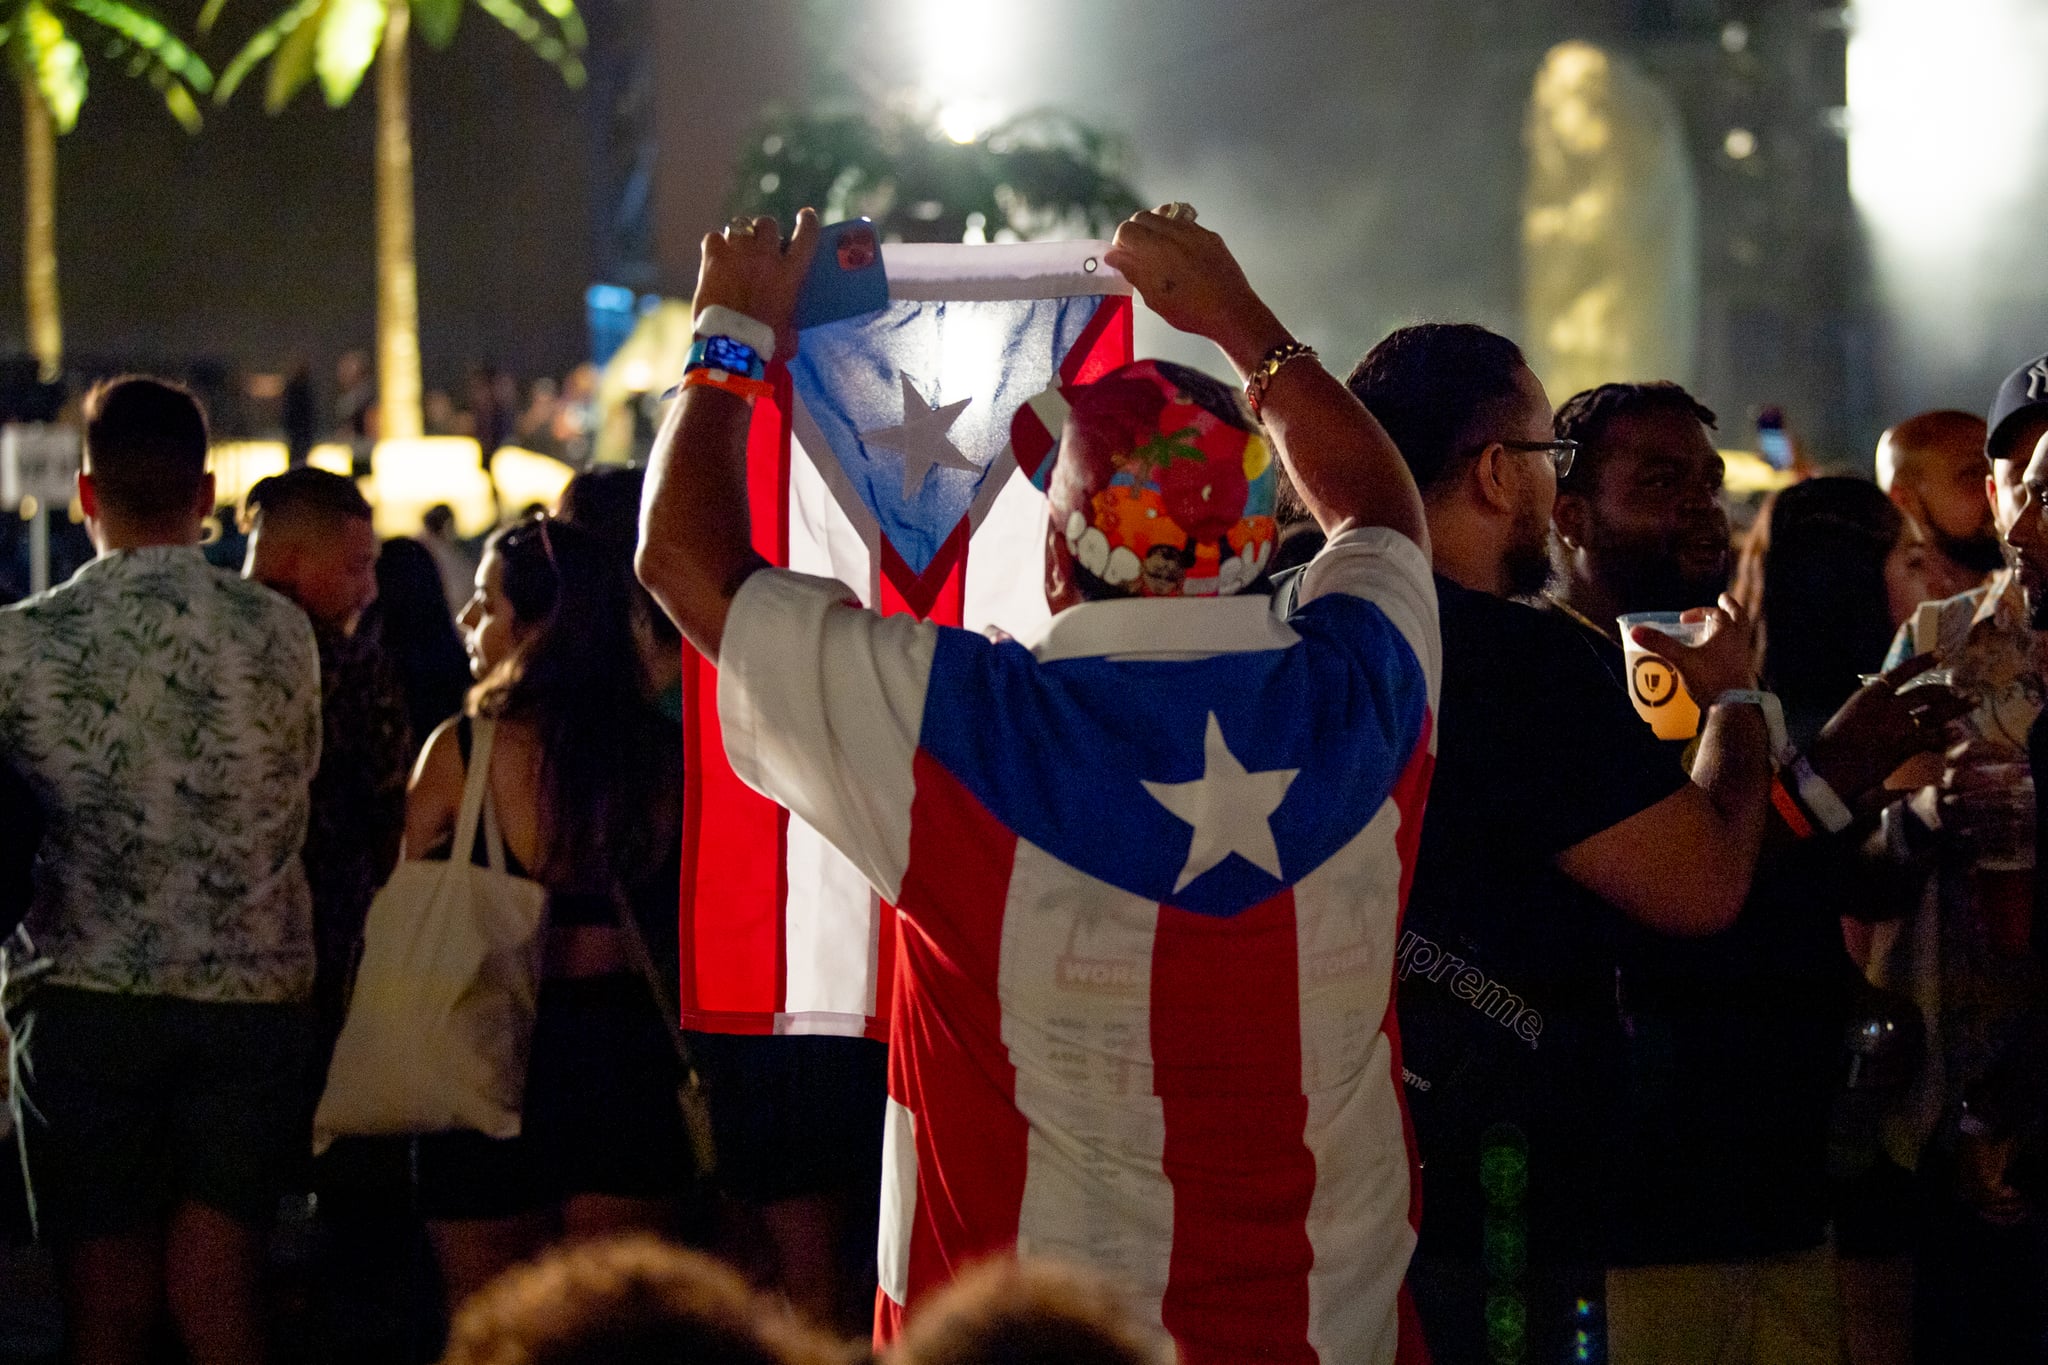 NEW YORK, NEW YORK - AUGUST 27: Members of the audience wear the Puerto Rico flag as Bad Bunny performs at Yankee Stadium on August 27, 2022 in New York City. (Photo by Roy Rochlin/Getty Images)